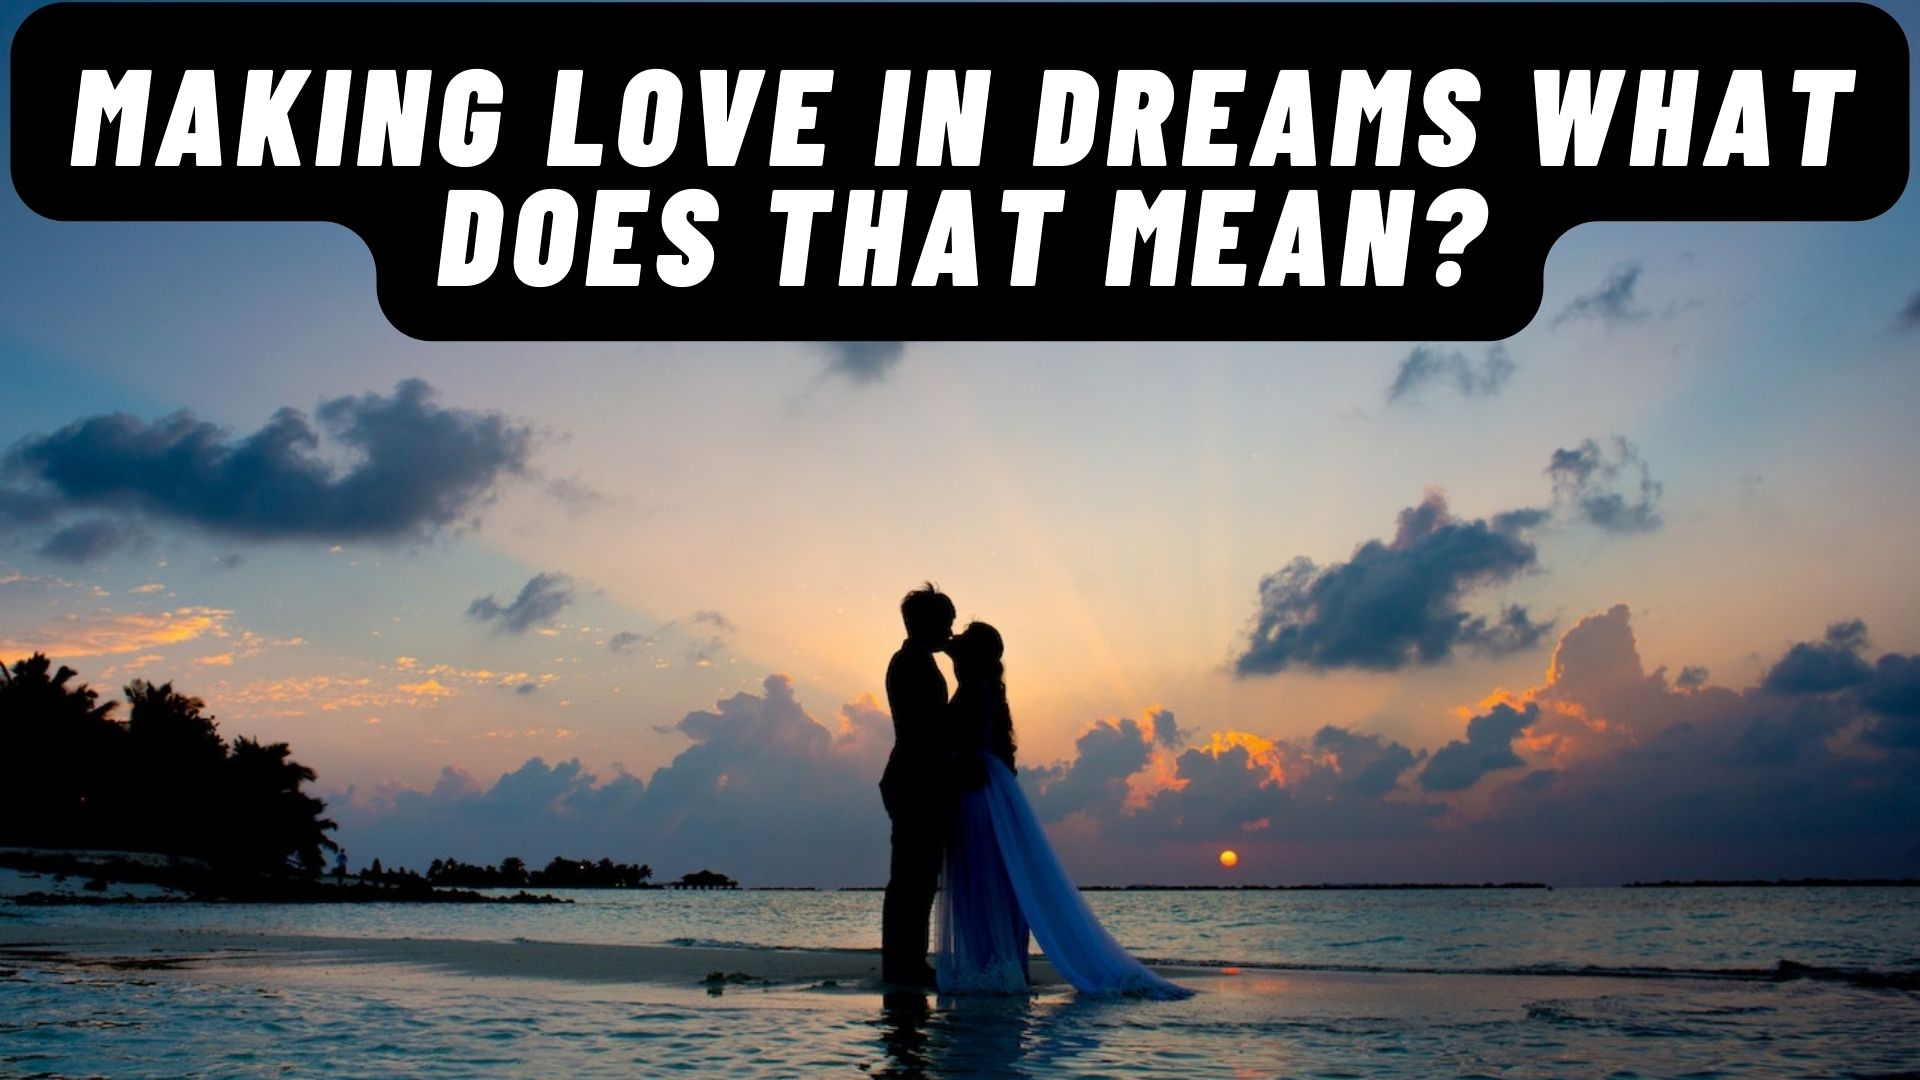 Making Love In Dreams - What Does That Mean?